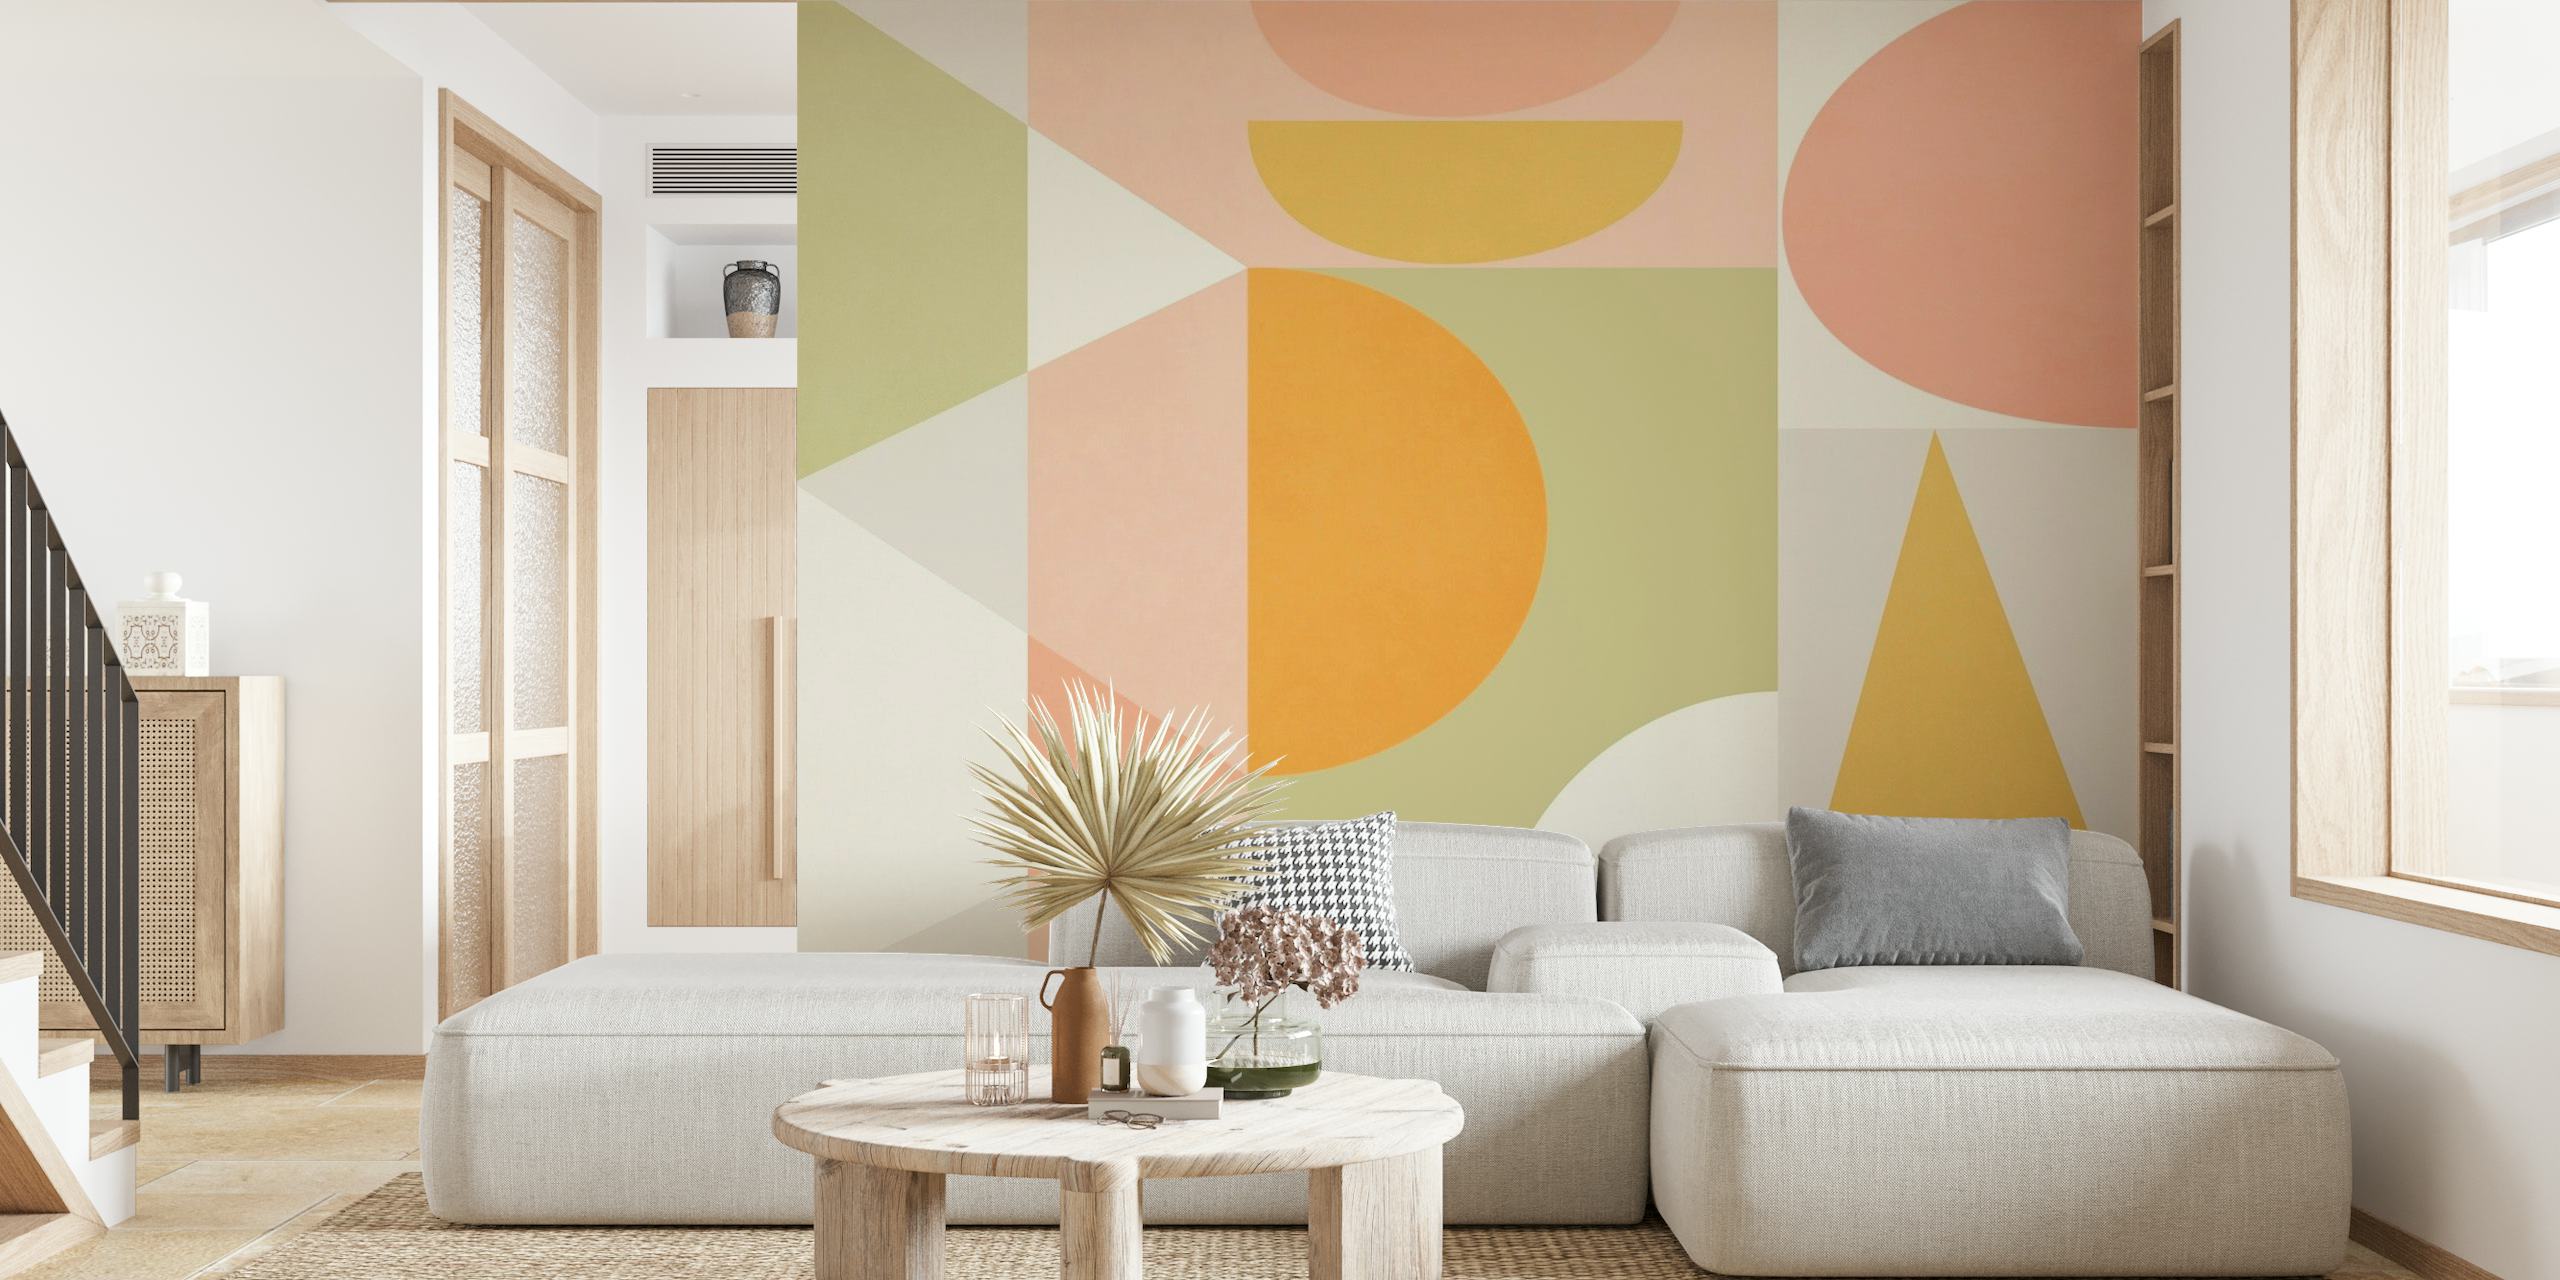 Abstract Geometric G3 wall mural with pastel tones and bold shapes